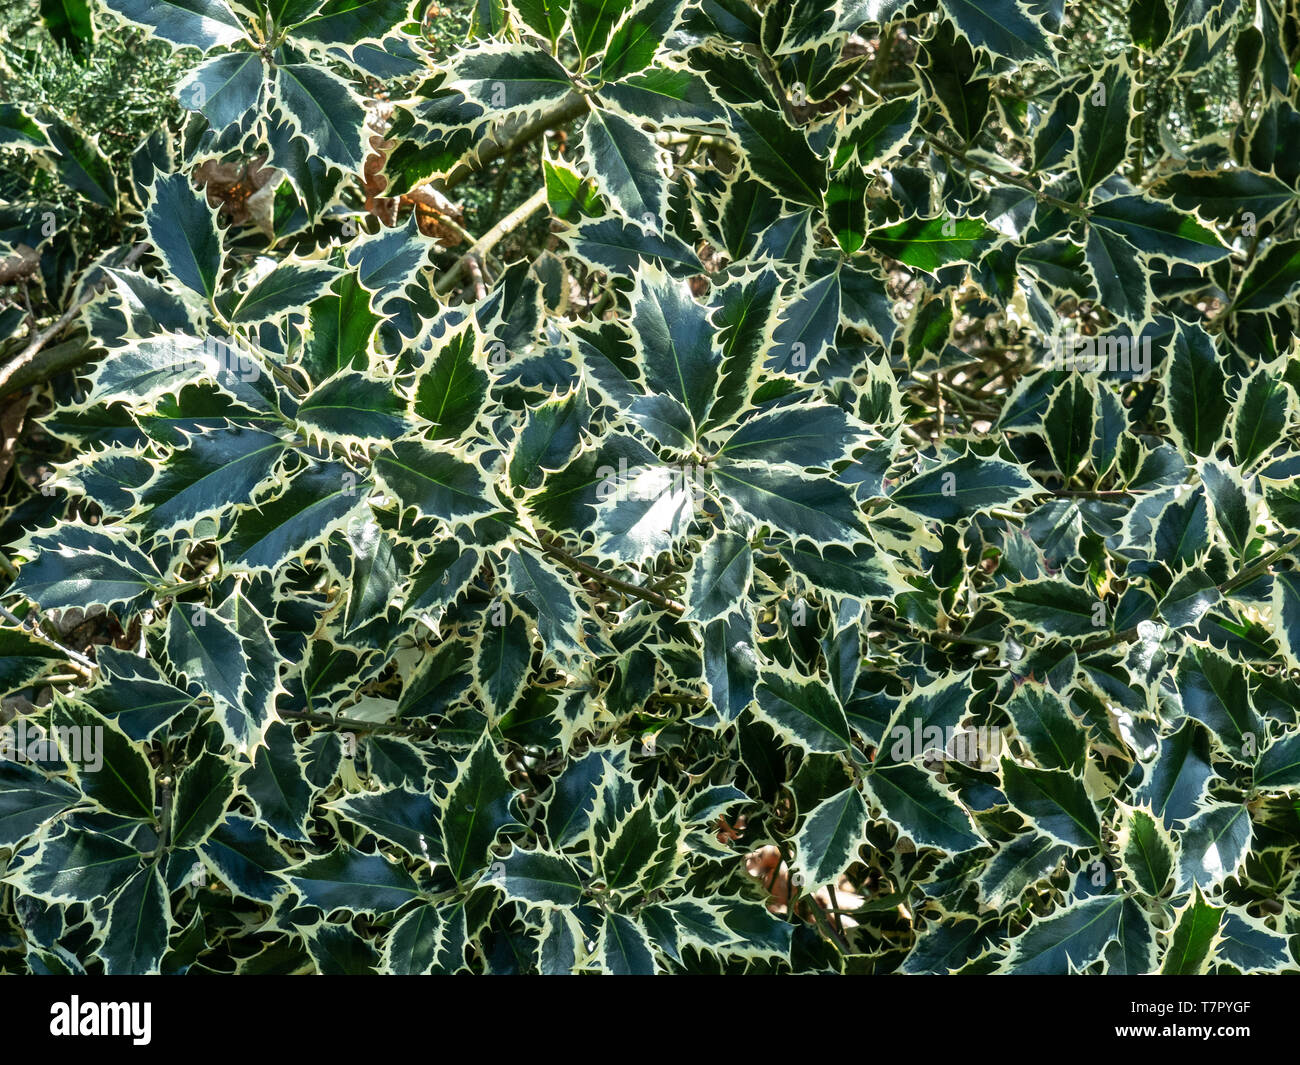 The silver edged foliage of Ilex Handsworth New Silver filling the complete frame Stock Photo